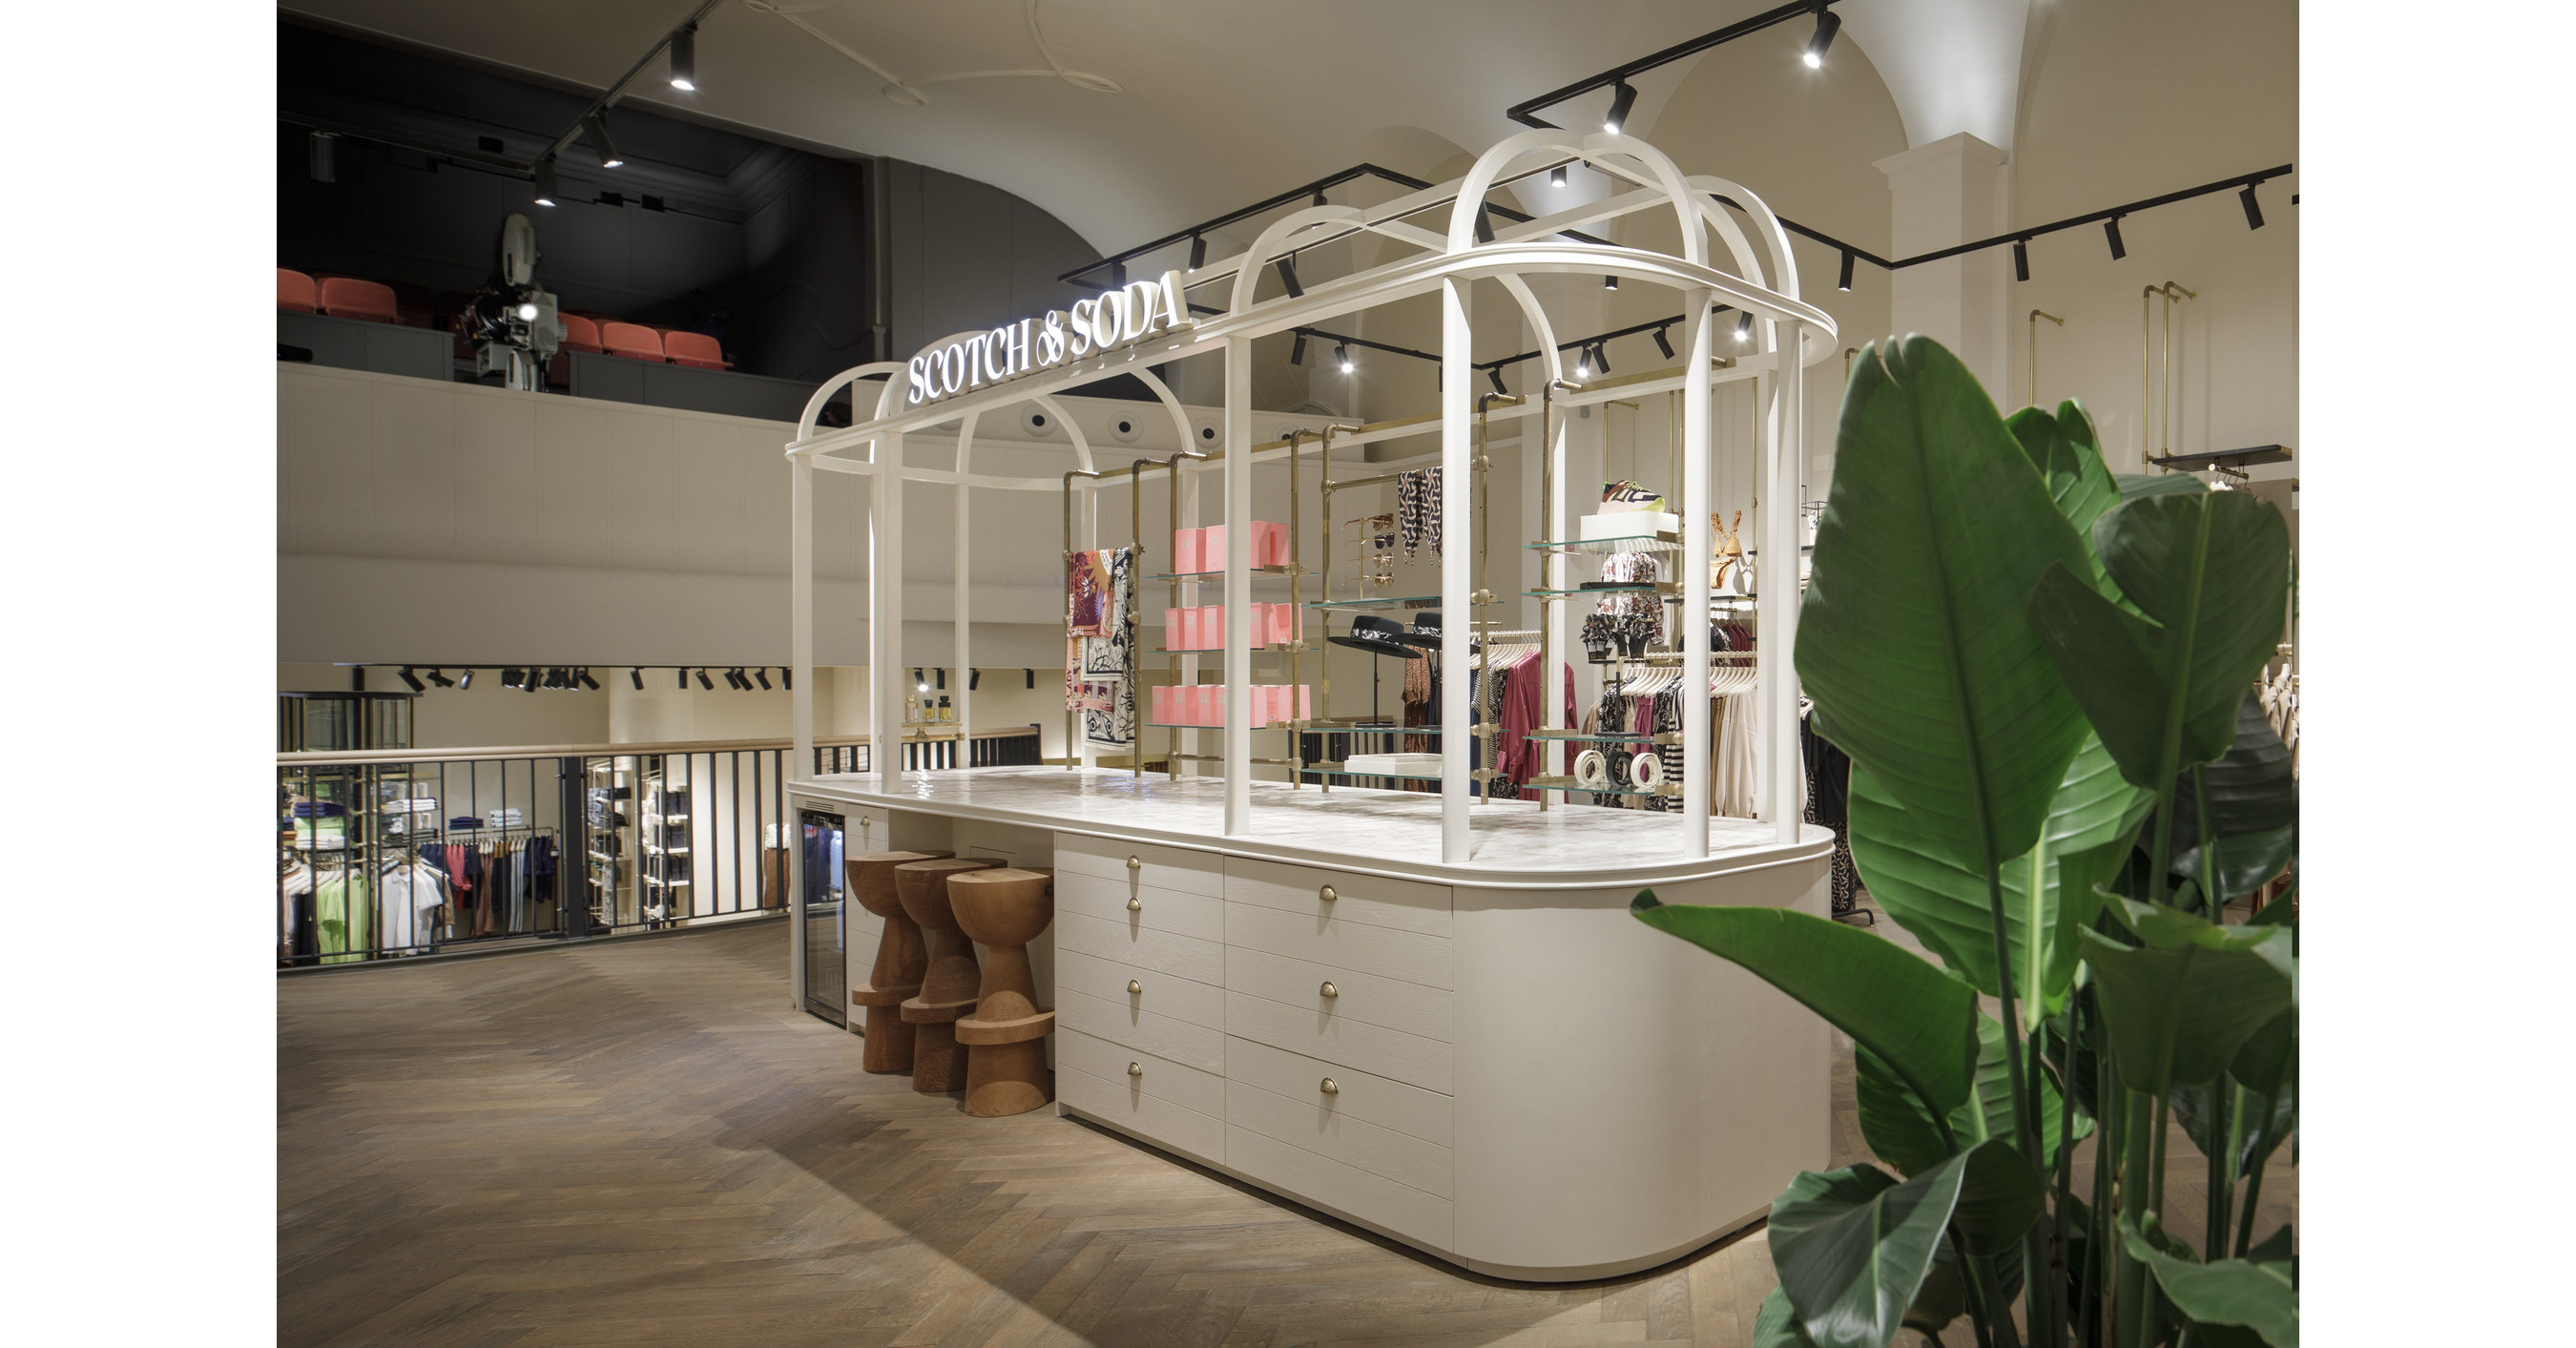 Detective Kantine regelmatig Scotch & Soda Announces The Opening Of Its Largest Store Worldwide In The  Netherlands, Featuring New Brand Identity